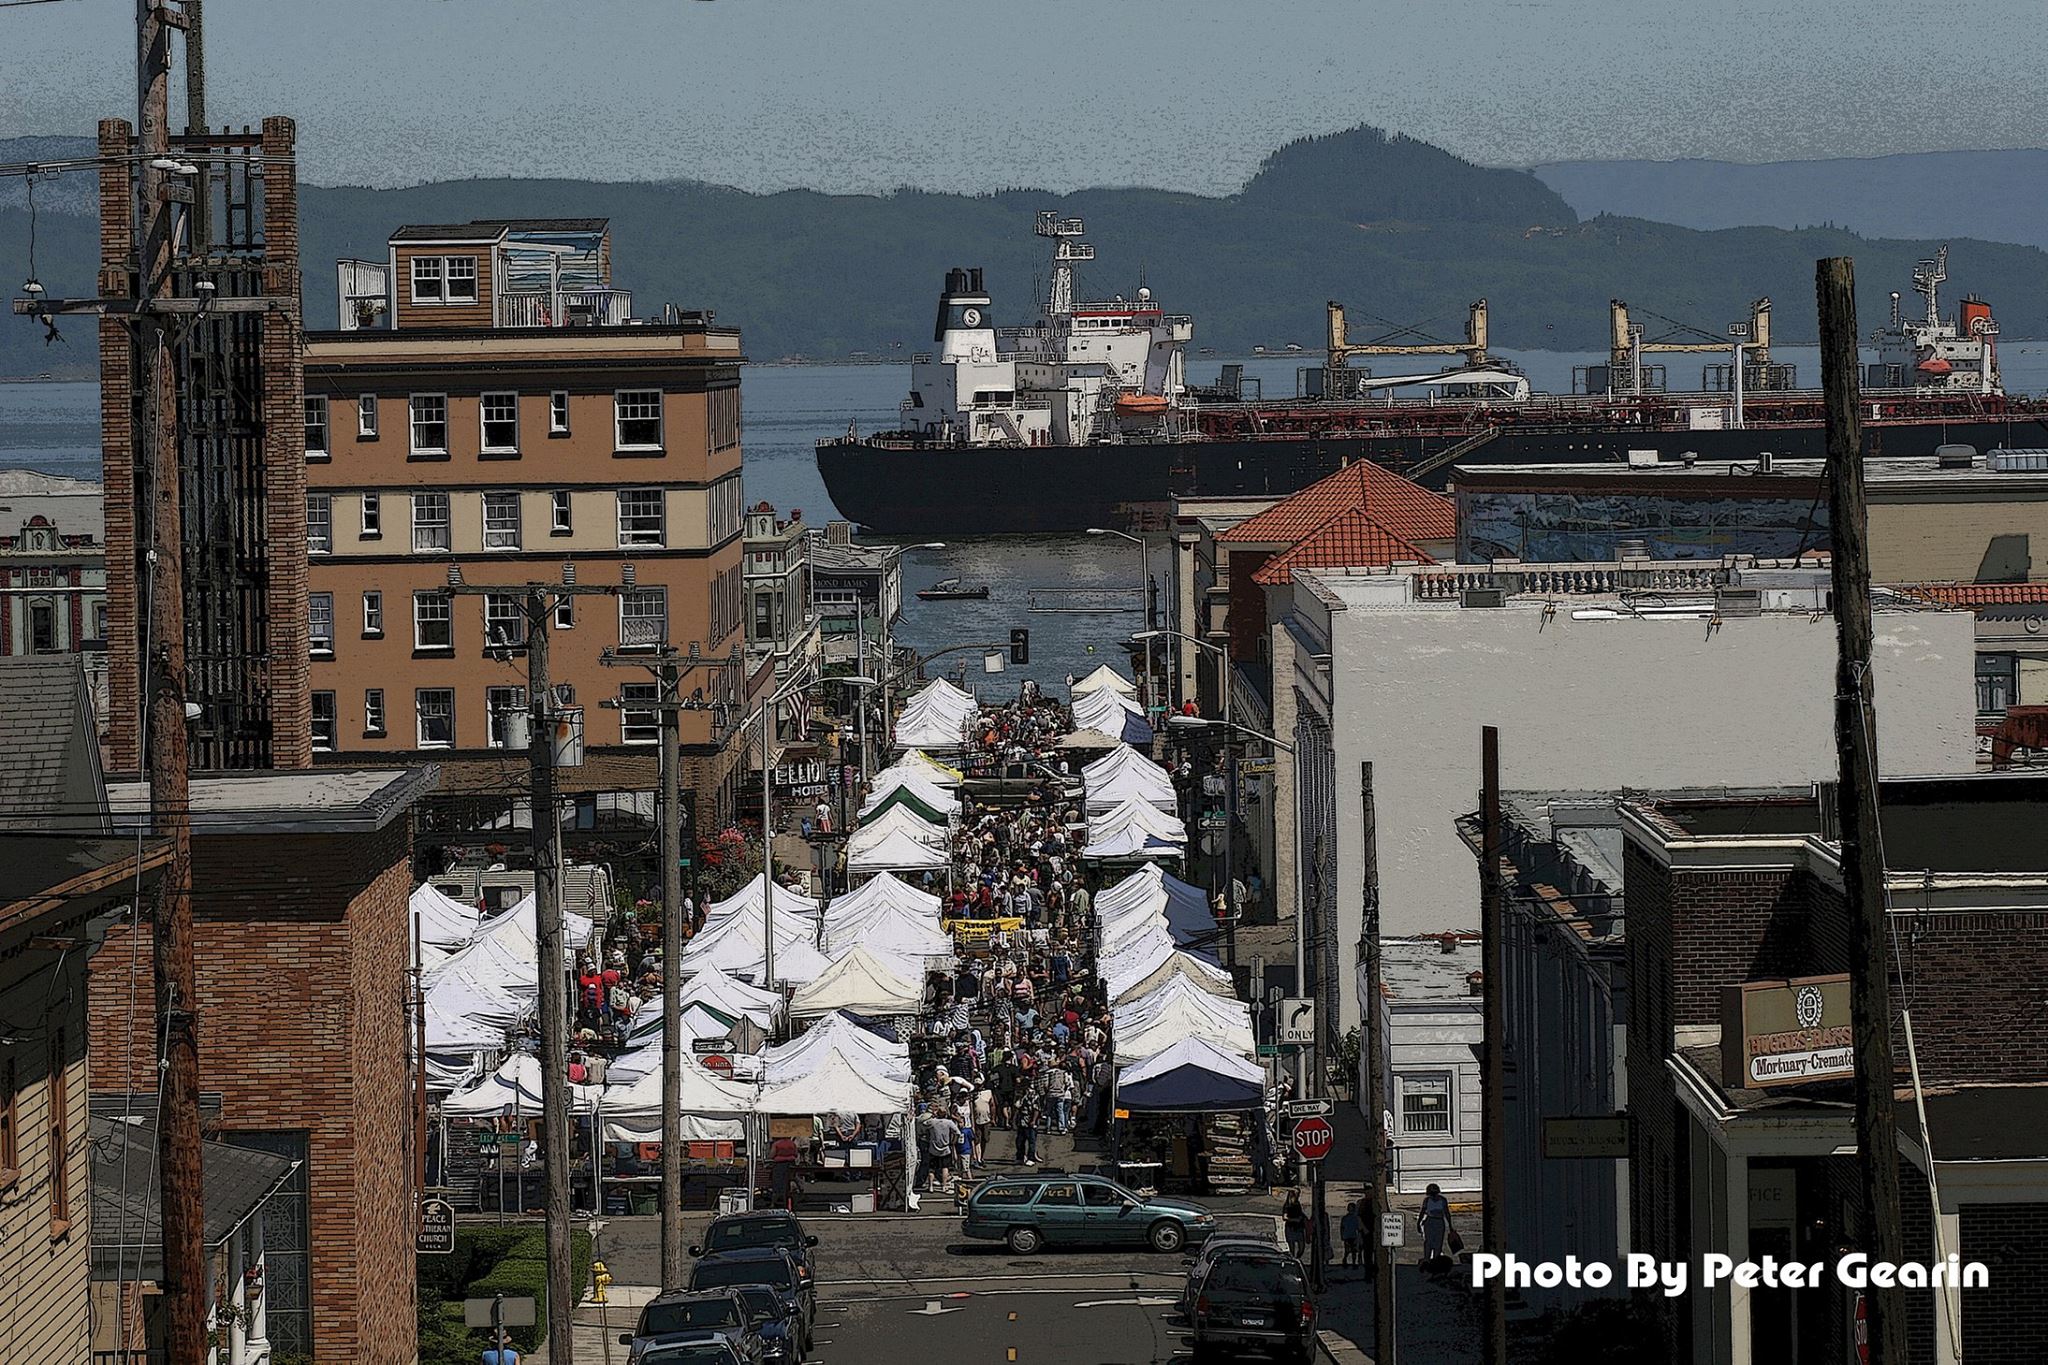 The Astoria Sunday Market – Your Unofficial Guide